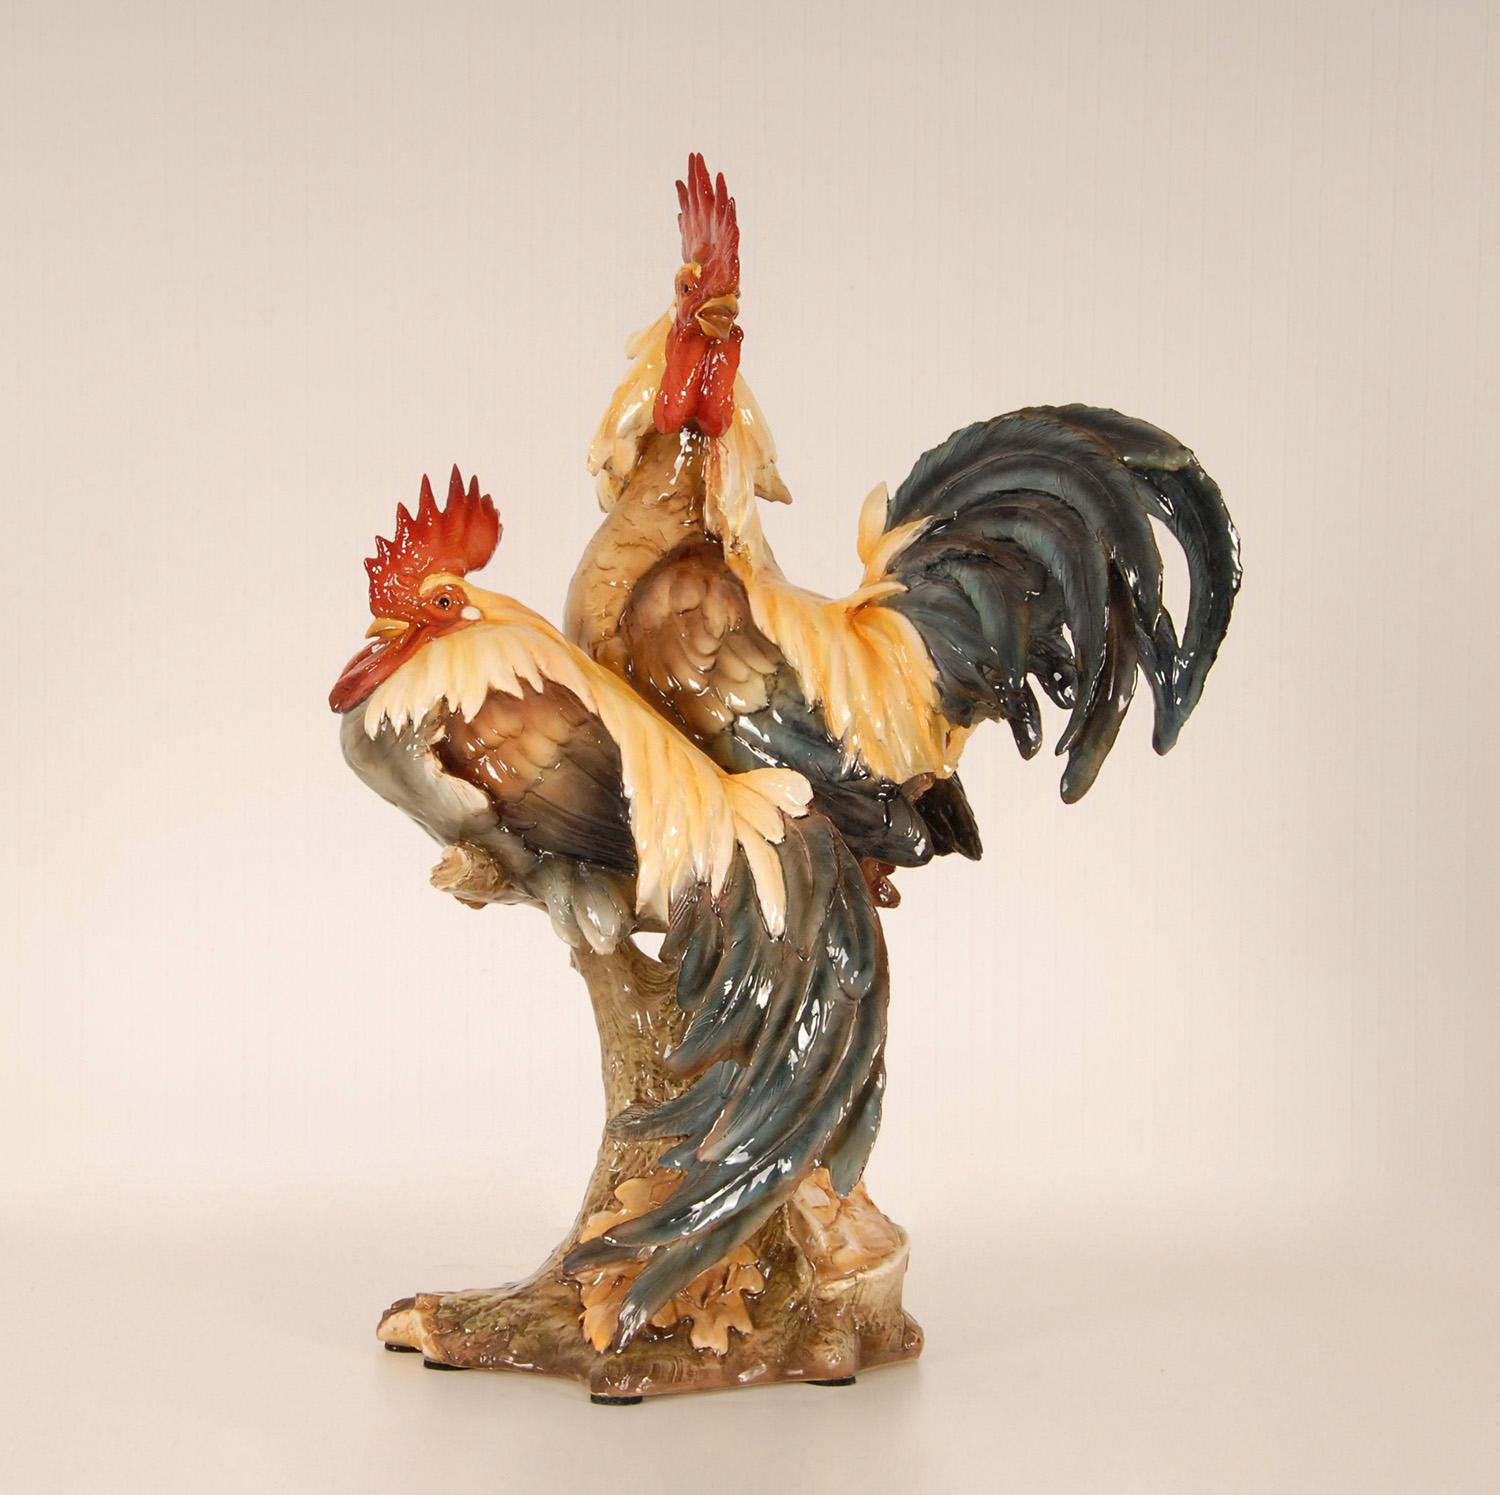 Art Deco mid Century Italian porcelain 2 roosters on a tree trunk
Material: Porcelain, Ceramic, Tin glazed
Design: In the manner of Cacciapuoti
Origin: Italy, first half 20th century
Style: Baroque, Art deco, Antique, Vintage, Mid Century, Hollywood